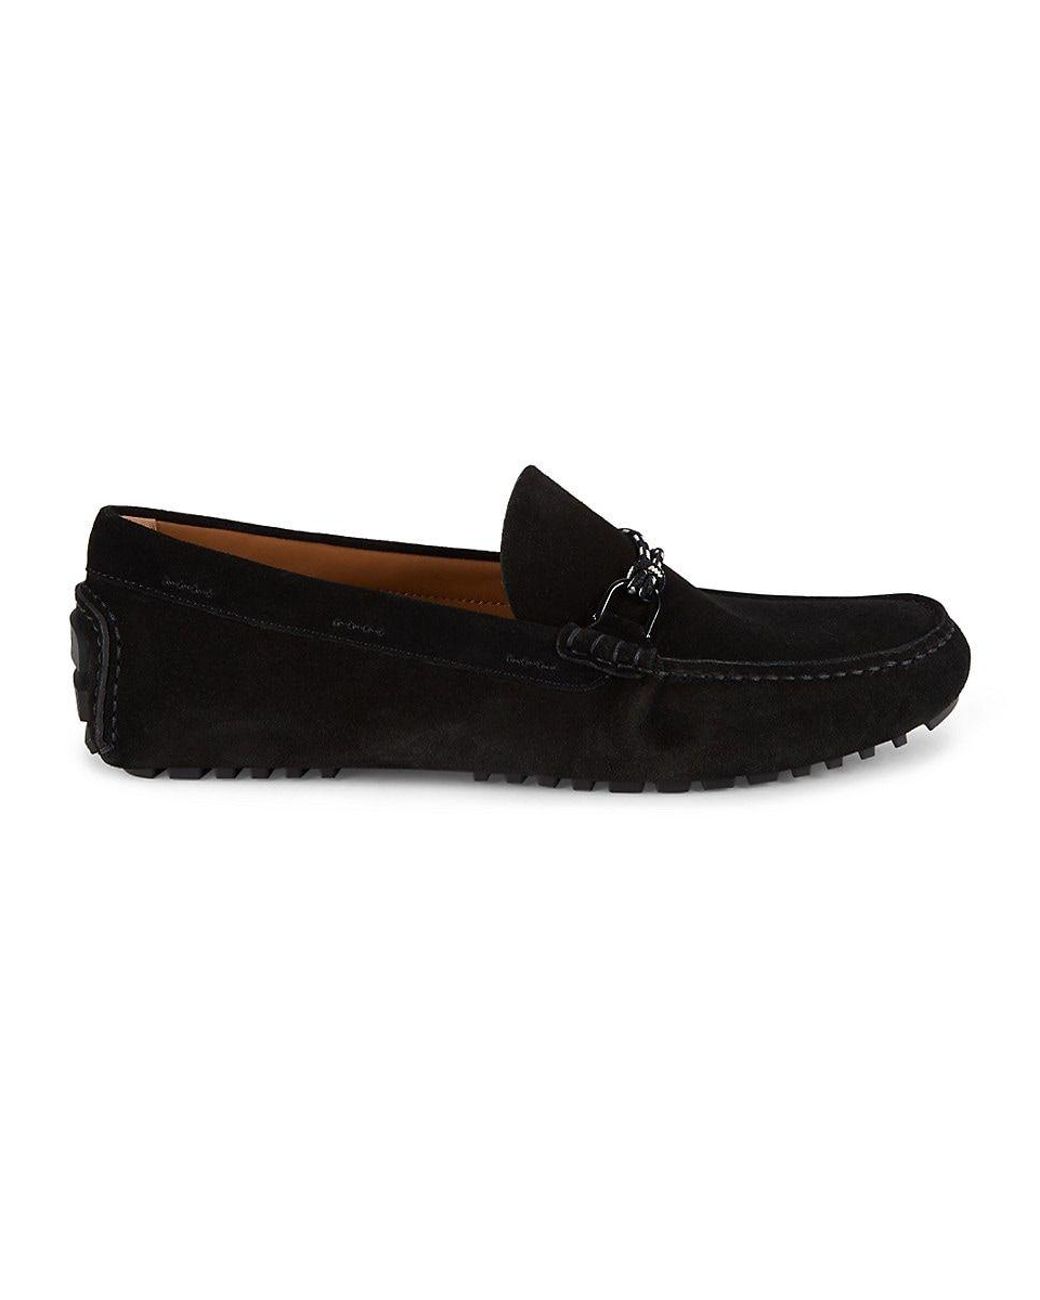 BOSS by HUGO BOSS Suede Bit Driving Loafers in Black for Men | Lyst